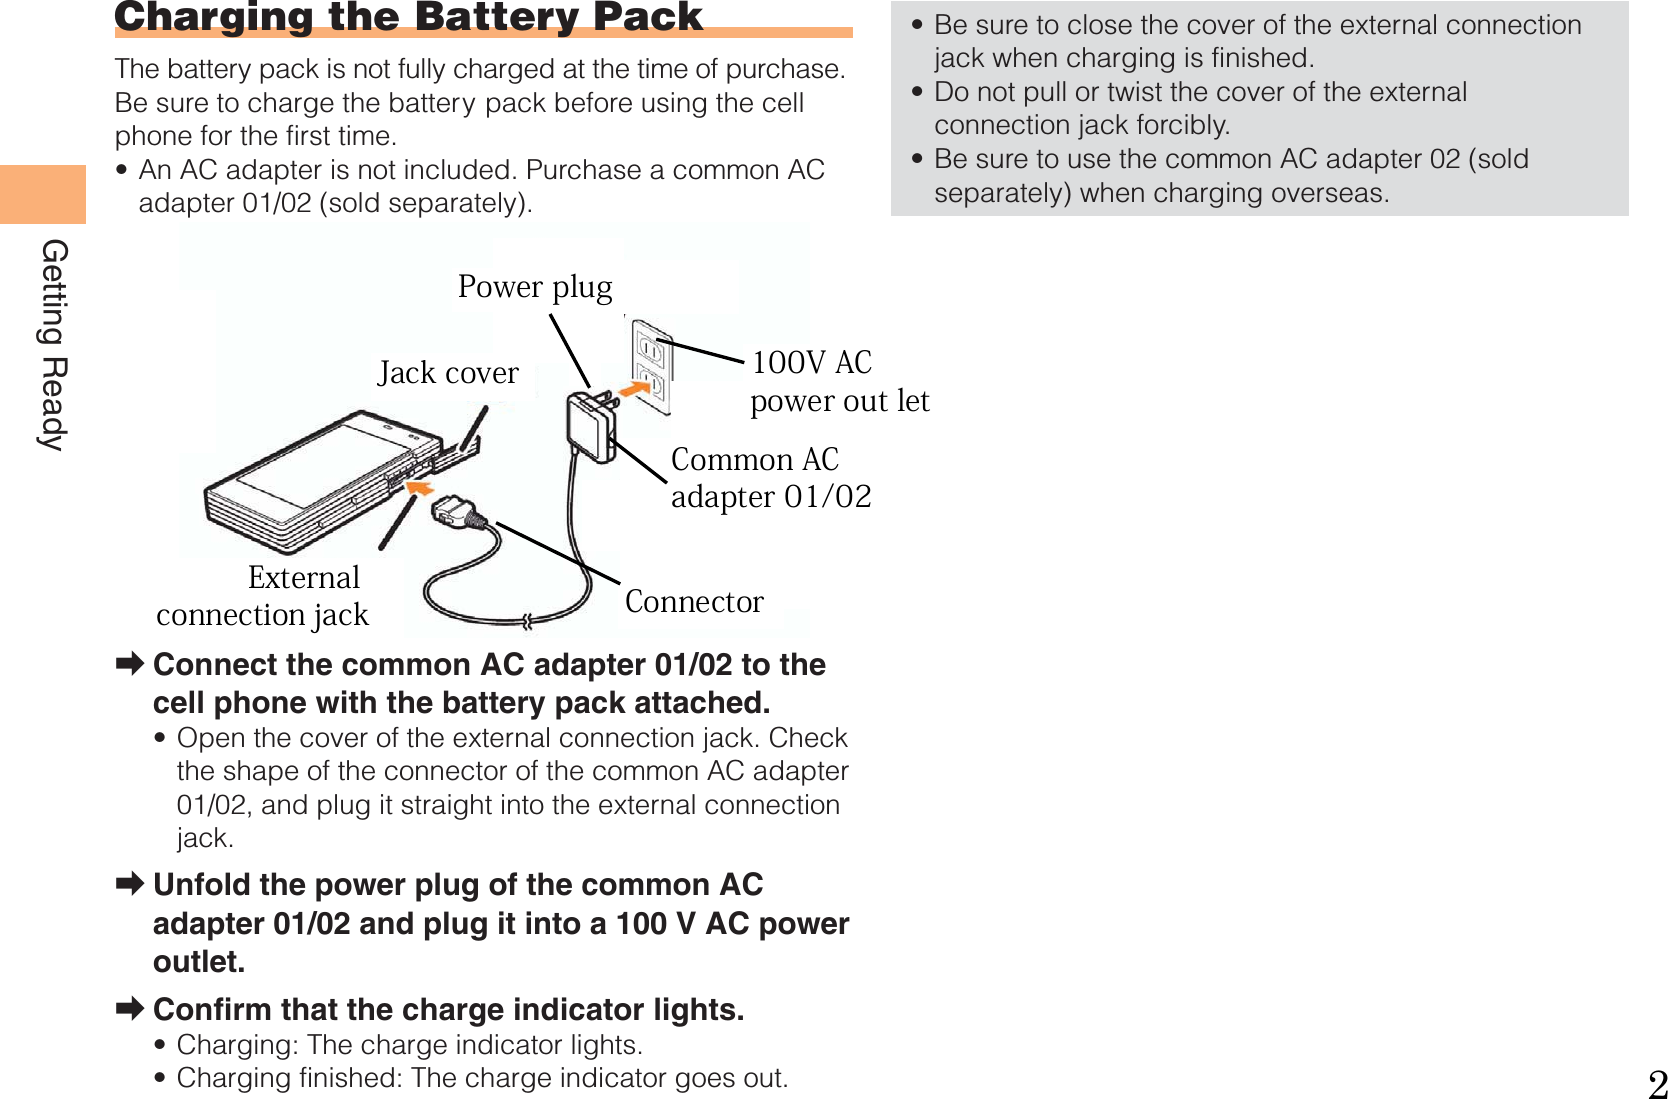 8Getting ReadyCharging the Battery PackThe battery pack is not fully charged at the time of purchase.Be sure to charge the battery pack before using the cell phone for the first time.An AC adapter is not included. Purchase a common AC adapter 01/02 (sold separately).Connect the common AC adapter 01/02 to the cell phone with the battery pack attached.Open the cover of the external connection jack. Check the shape of the connector of the common AC adapter 01/02, and plug it straight into the external connection jack.Unfold the power plug of the common AC adapter 01/02 and plug it into a 100 V AC power outlet.Confirm that the charge indicator lights.Charging: The charge indicator lights.Charging finished: The charge indicator goes out.•➡•➡➡••Be sure to close the cover of the external connection jack when charging is finished.Do not pull or twist the cover of the external connection jack forcibly.Be sure to use the common AC adapter 02 (sold separately) when charging overseas.•••CommonAC adapter 01/02100 V AC power outletPowerplugCharge indicatorConnectorExternal connection jackCommonAC adapter 01/02100 V AC power outletPowerplugCharge indicatorConnectorExternal connection jack   External  connection jackJack cover 100V AC  power out letCommon AC adapter 01/02ConnectorPower plug2